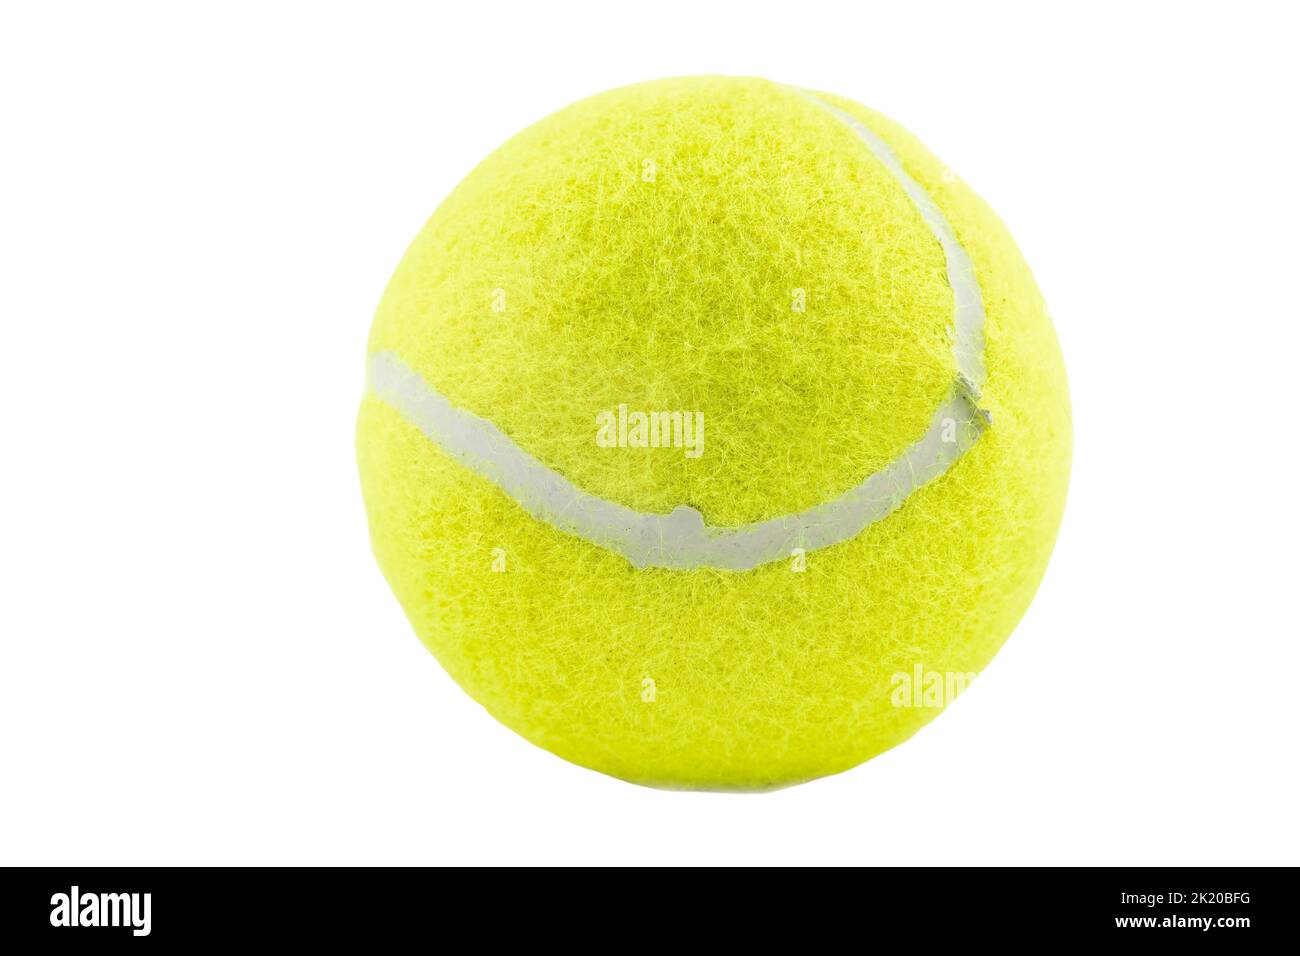 Tennis ball isolated in white Stock Photo